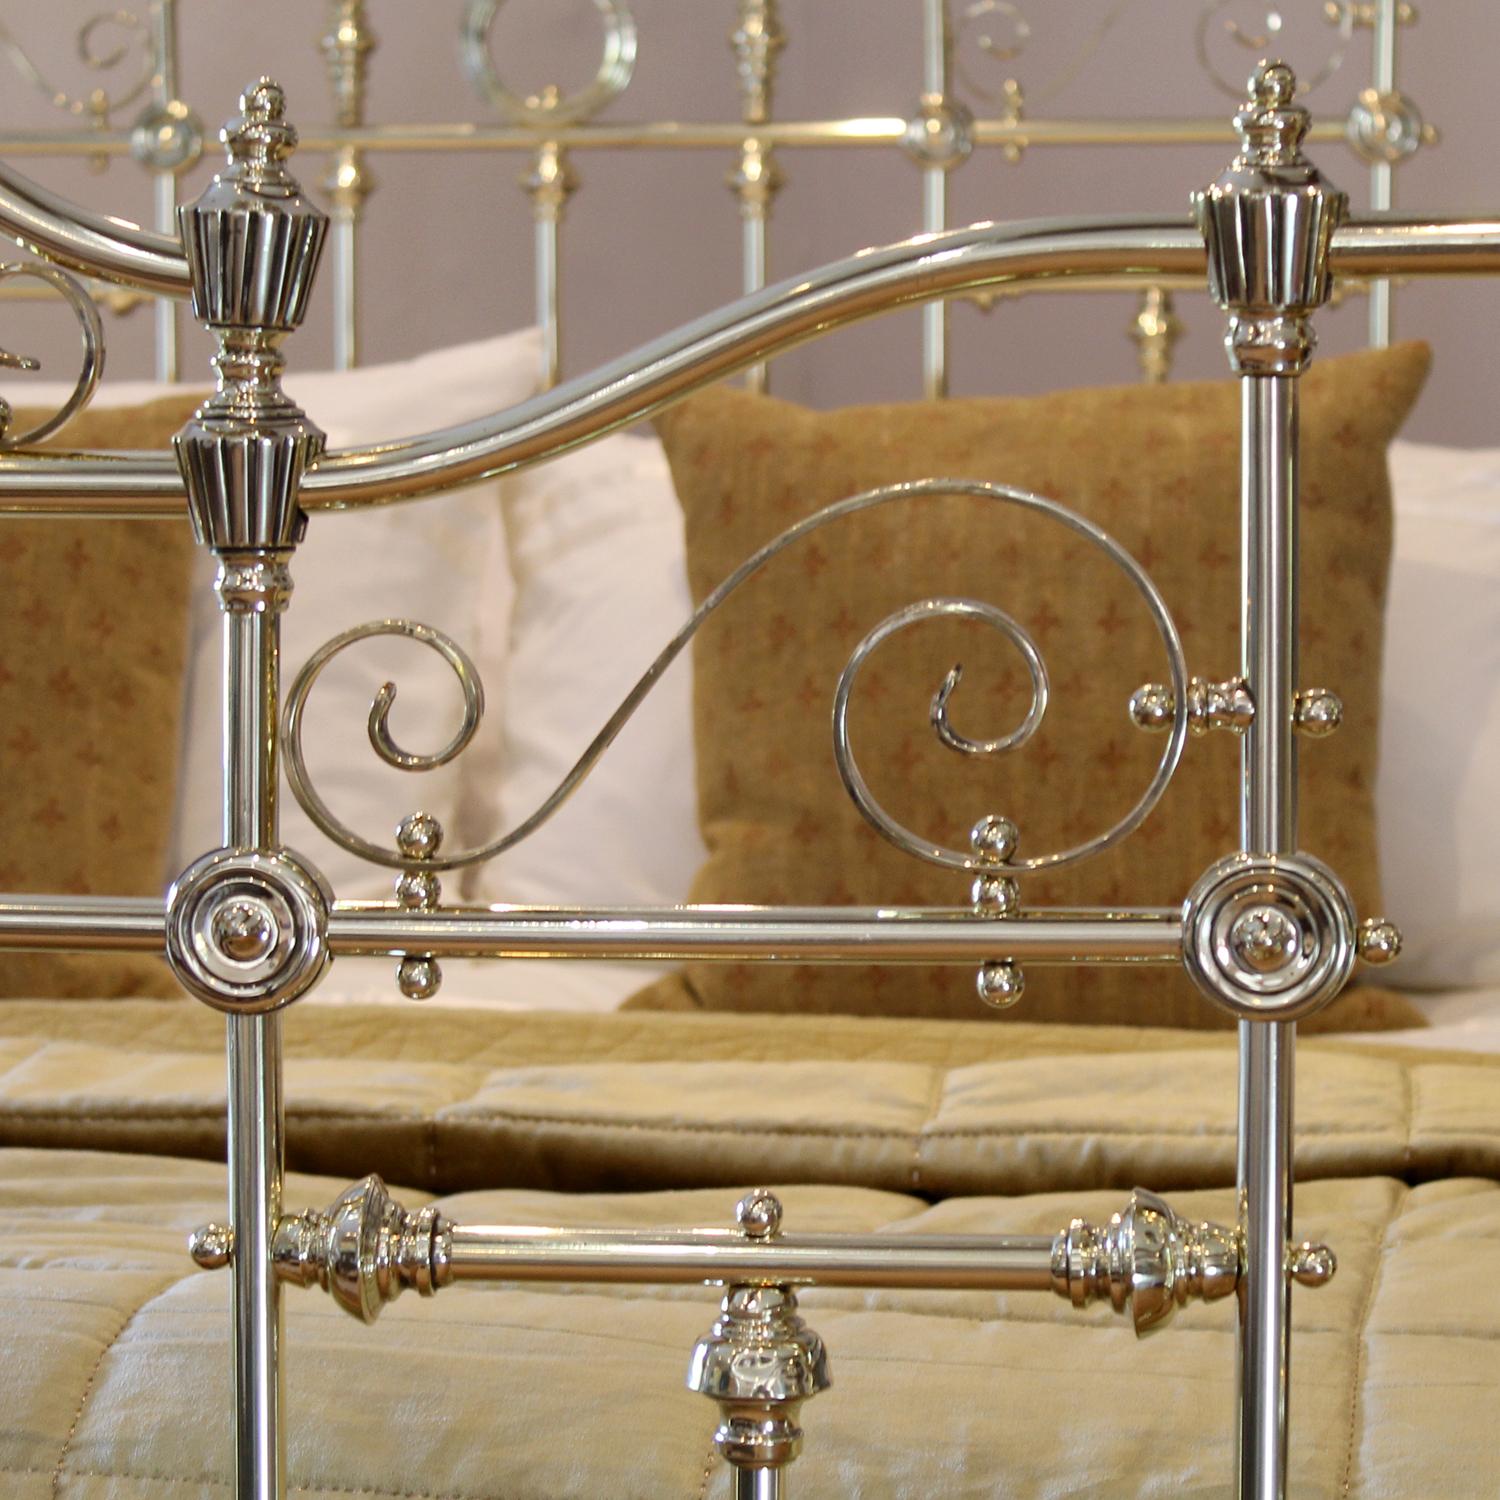 Late Victorian Victorian All Brass Antique Bed MK283 For Sale